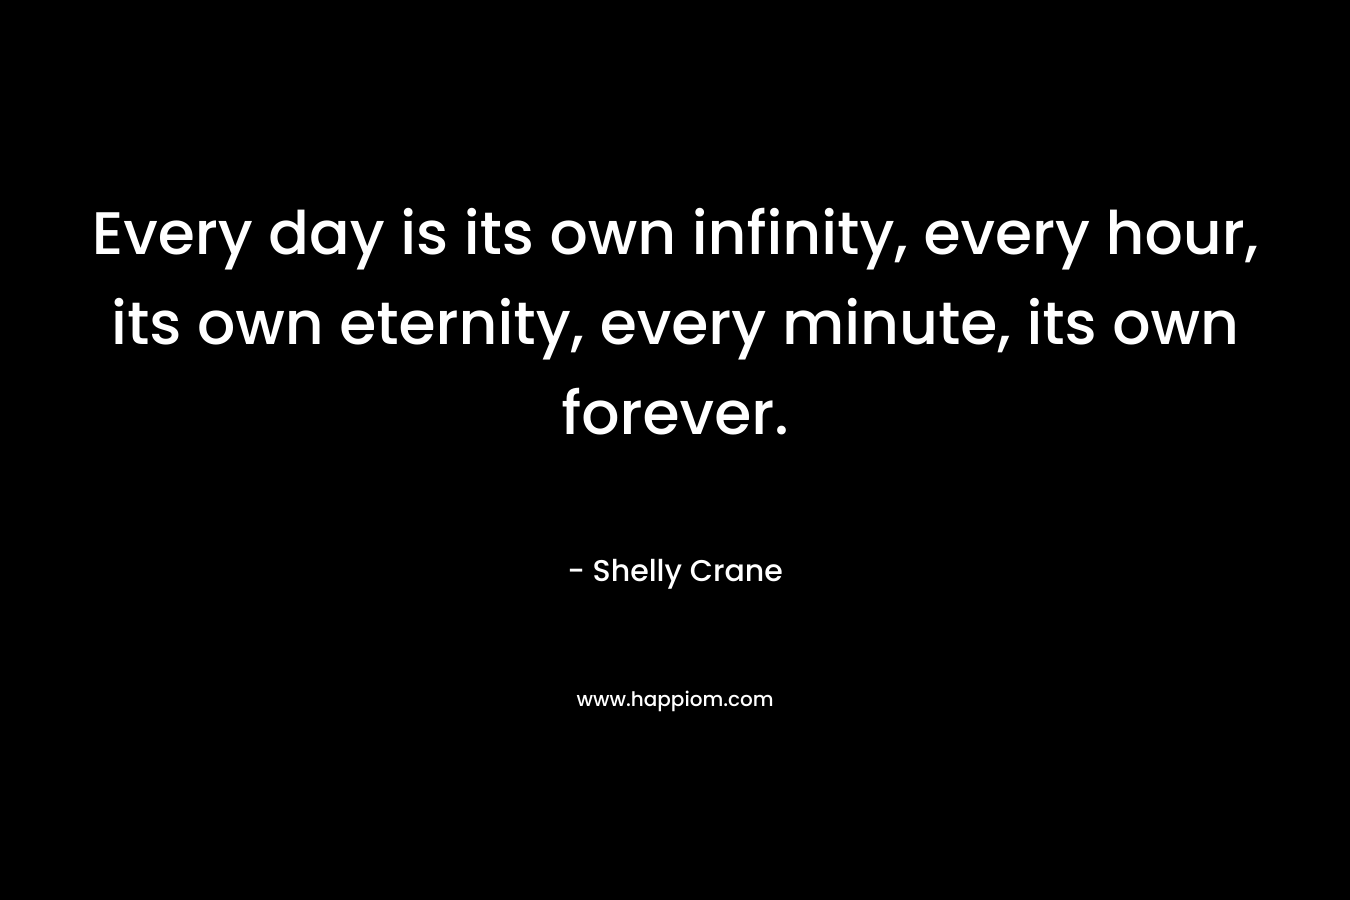 Every day is its own infinity, every hour, its own eternity, every minute, its own forever.